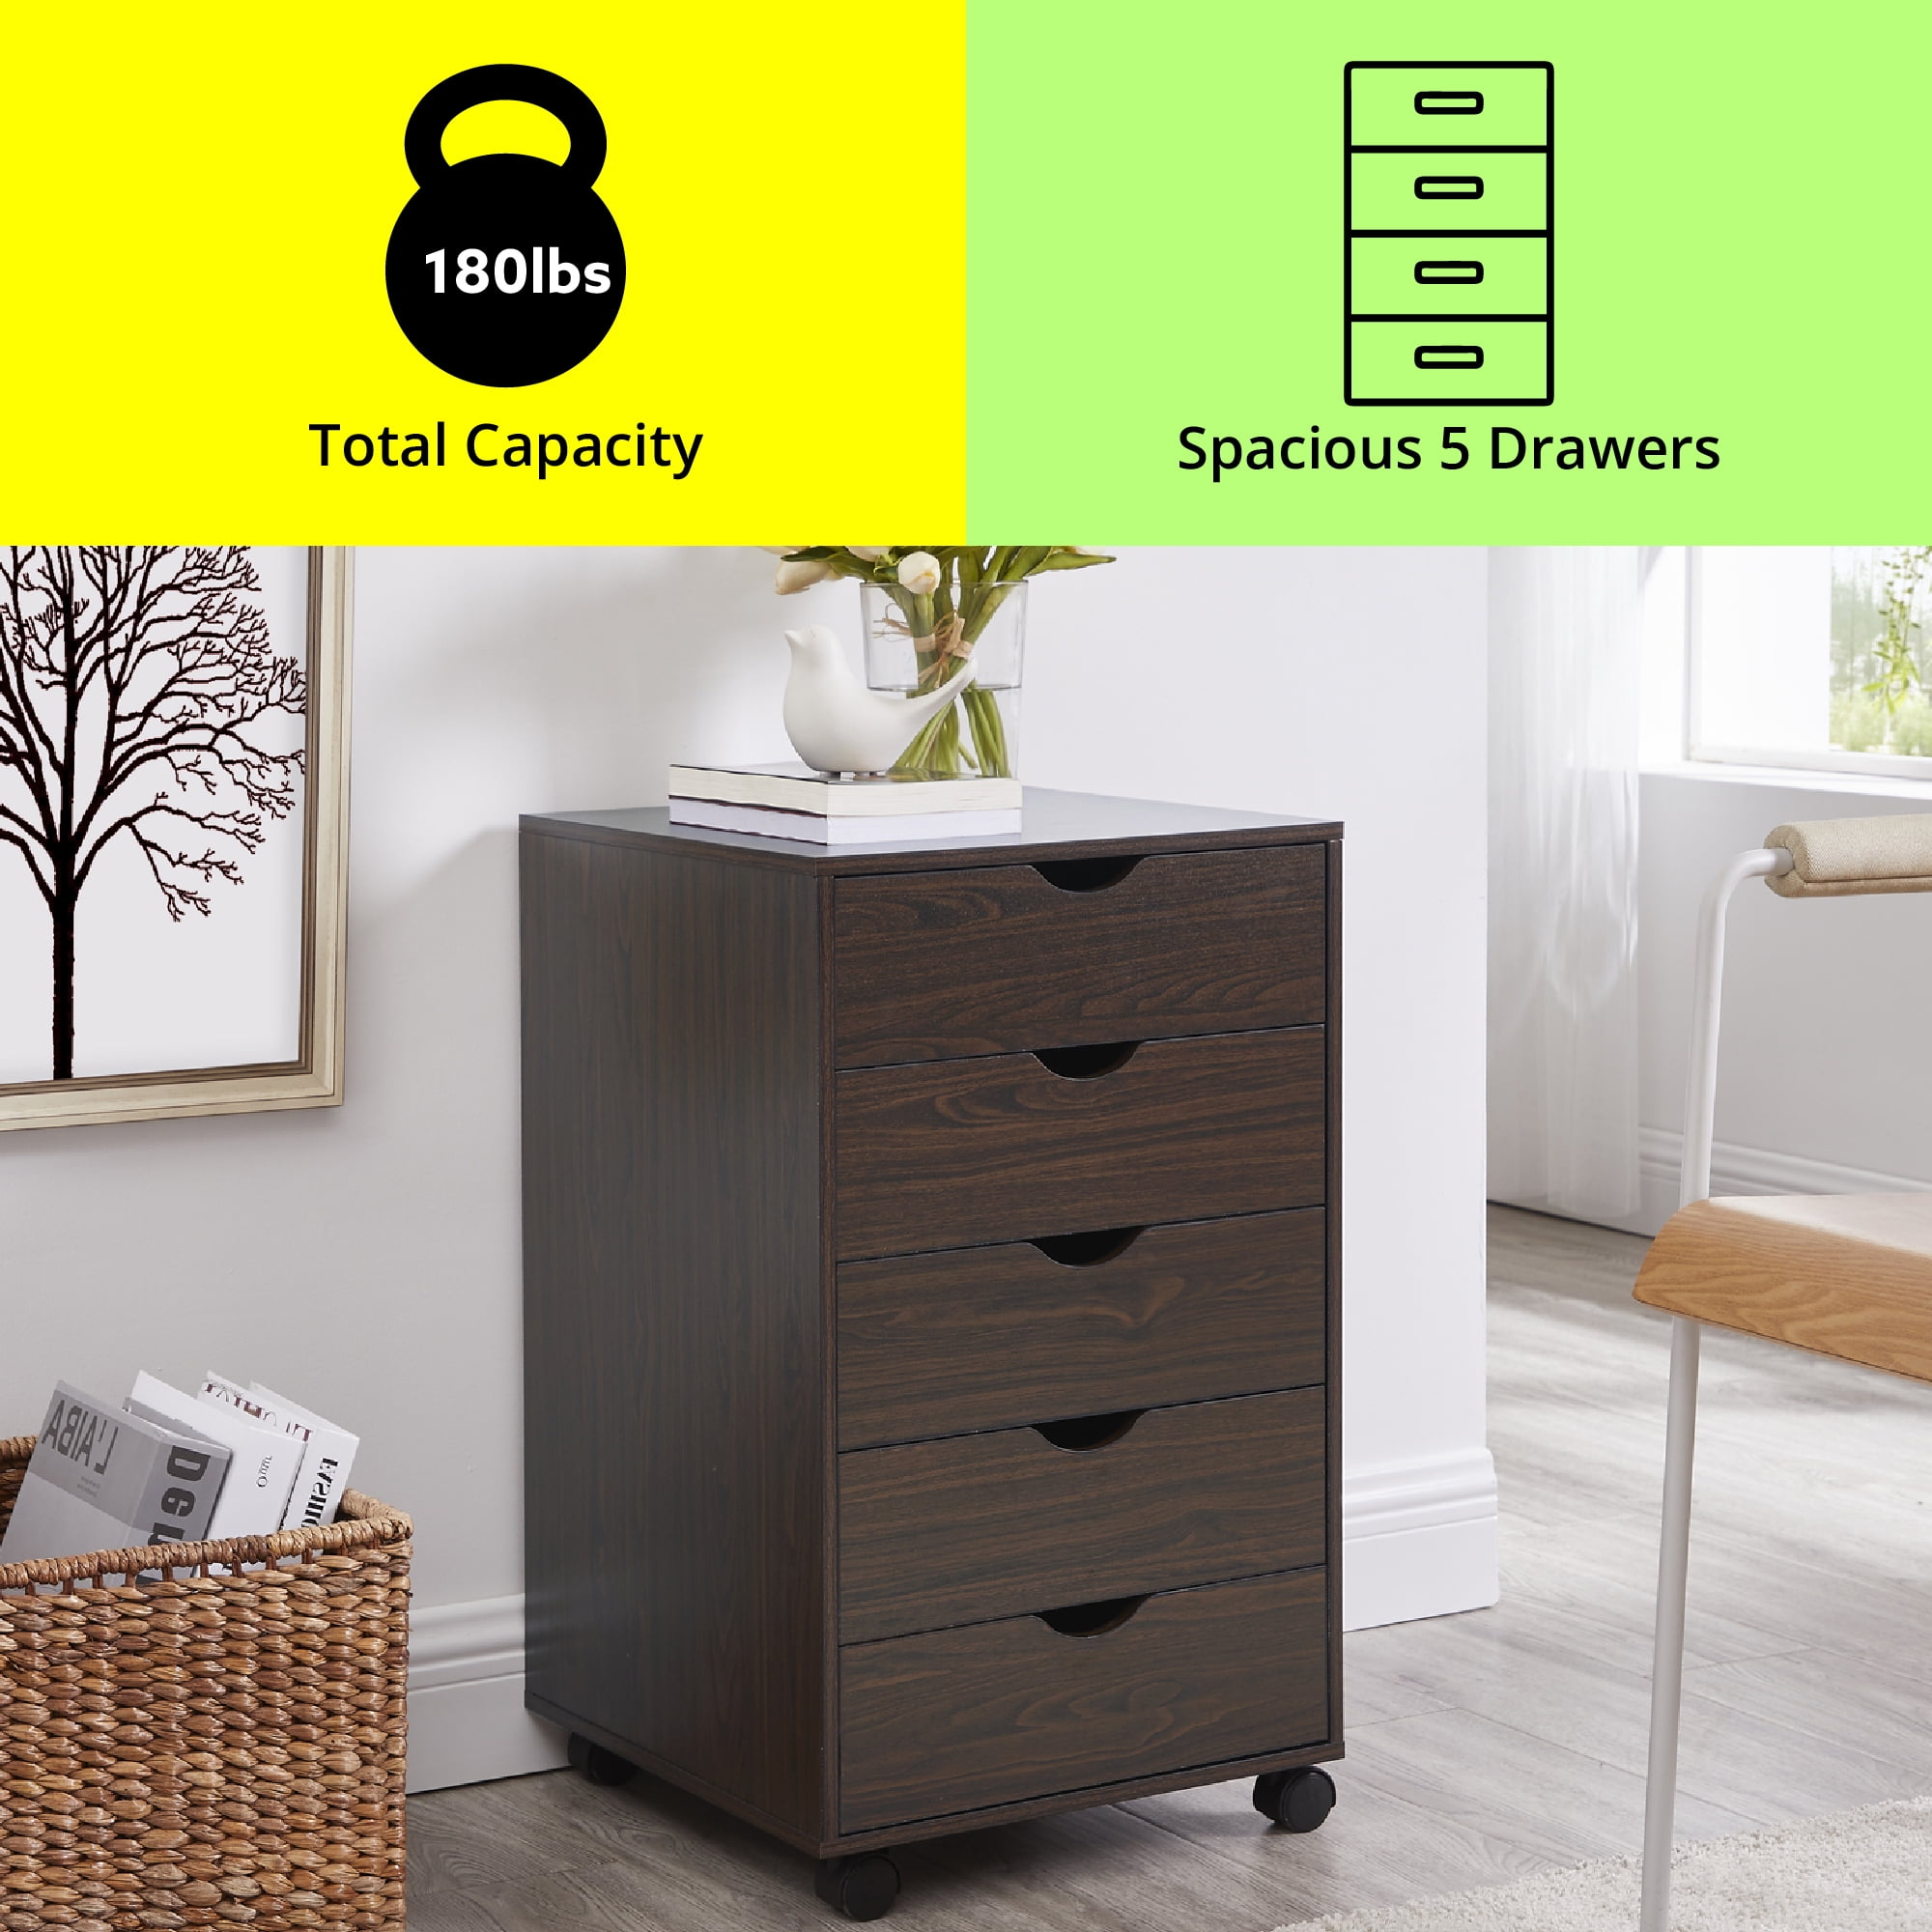 Details about   NEW 3 Drawer Chest Storage Unit For Kids Room Easy Assembled Children Furniture 